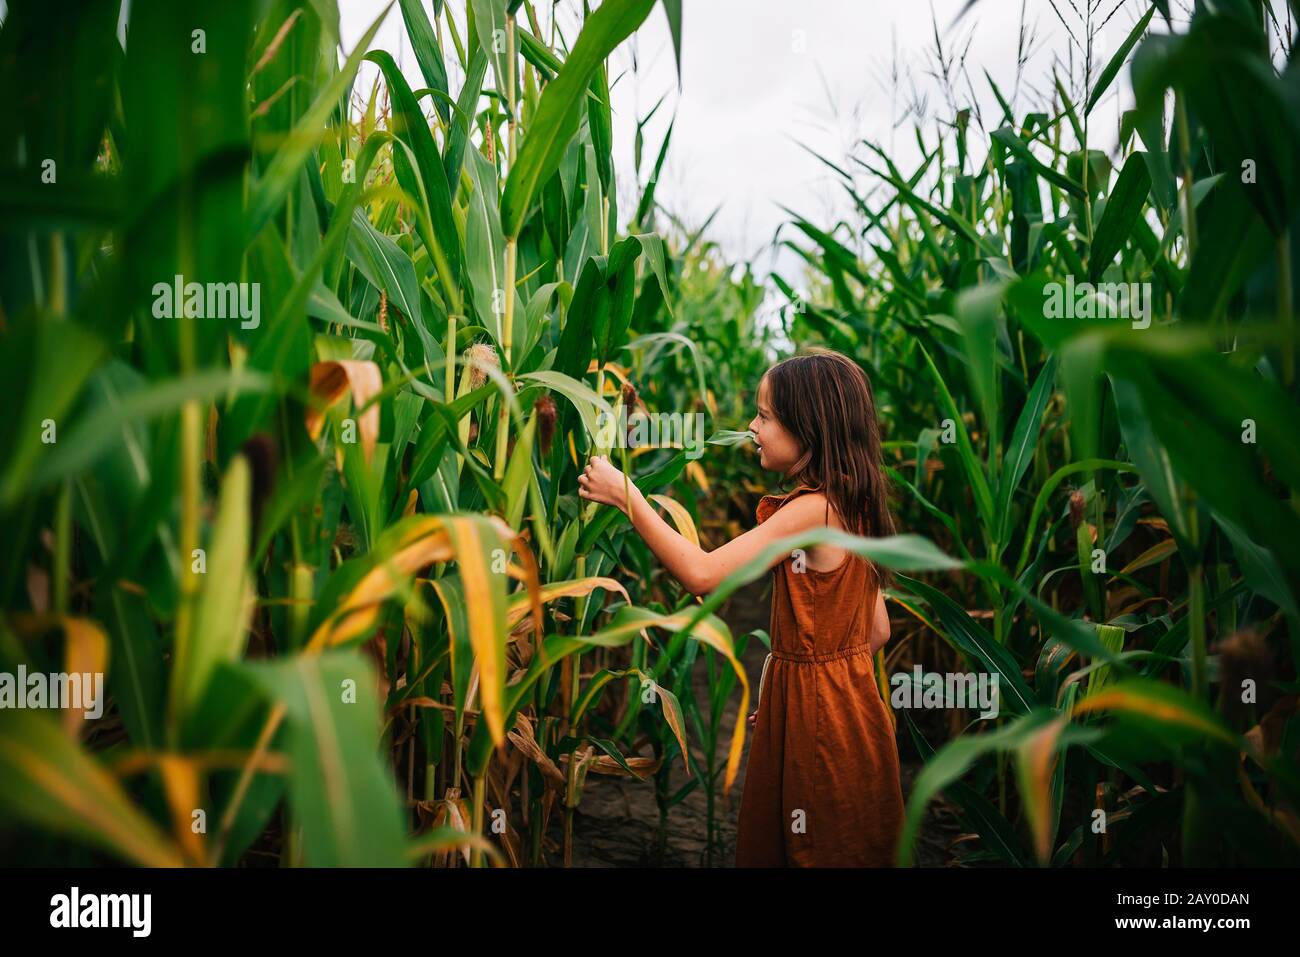 Portrait of a girl in a corn field touching a plant, USA Stock Photo